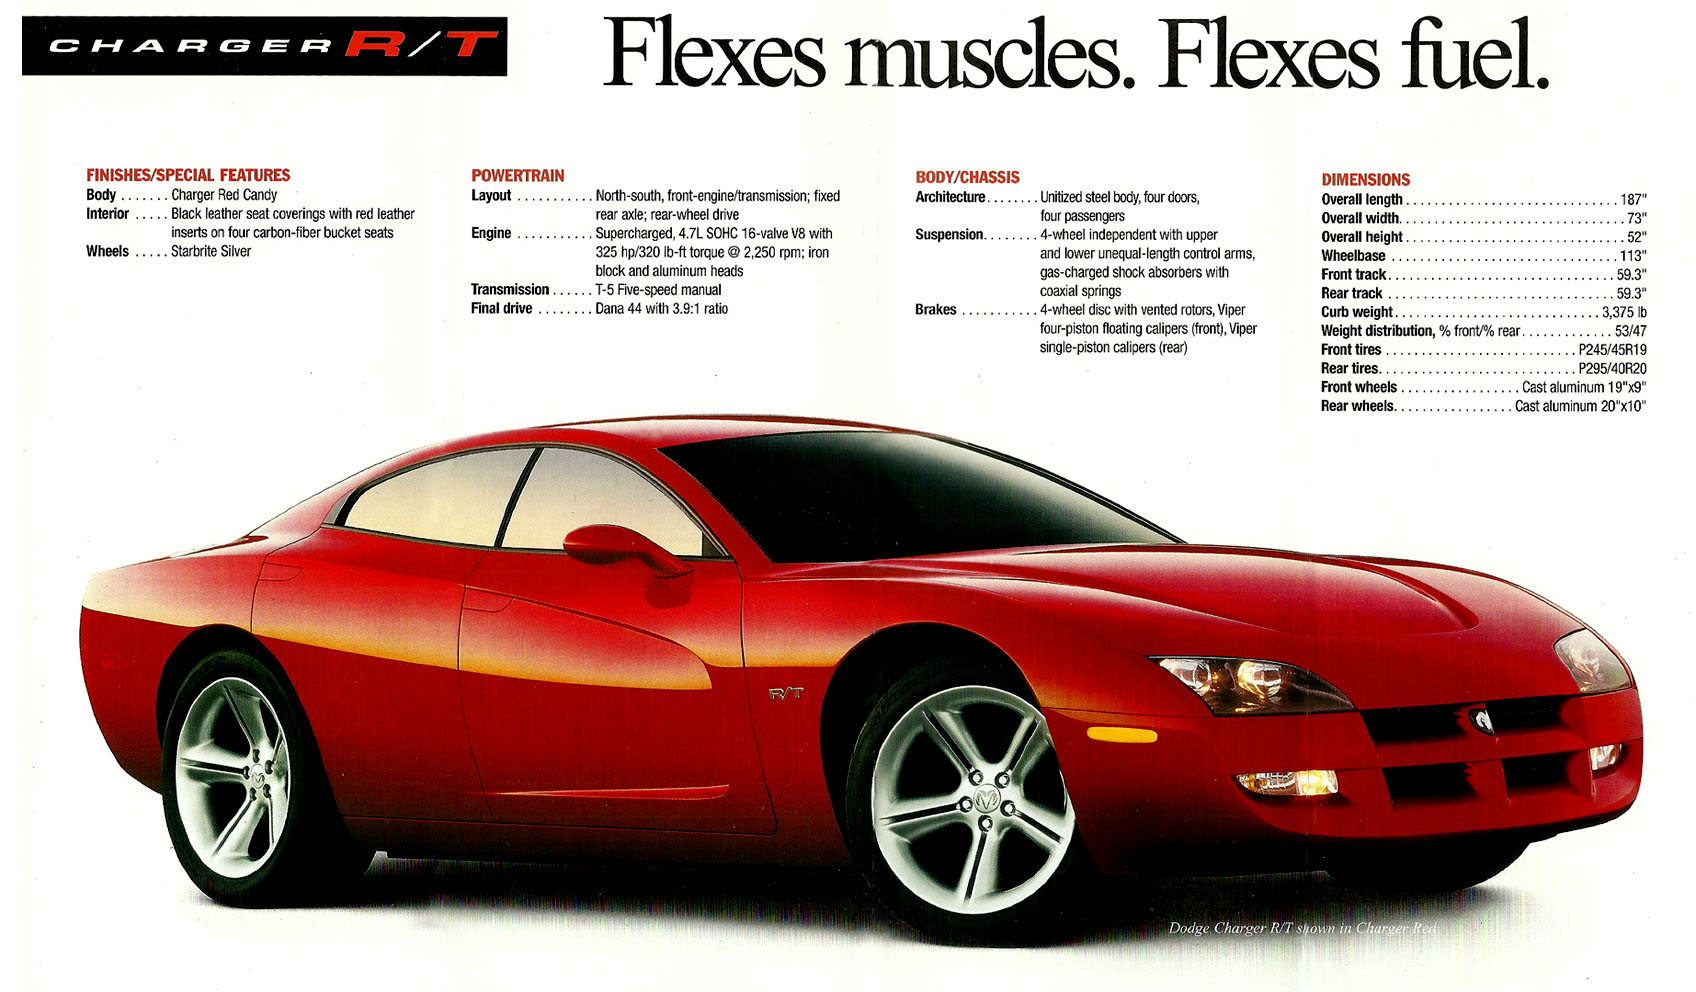 1999_Dodge_Charger_Concept-03